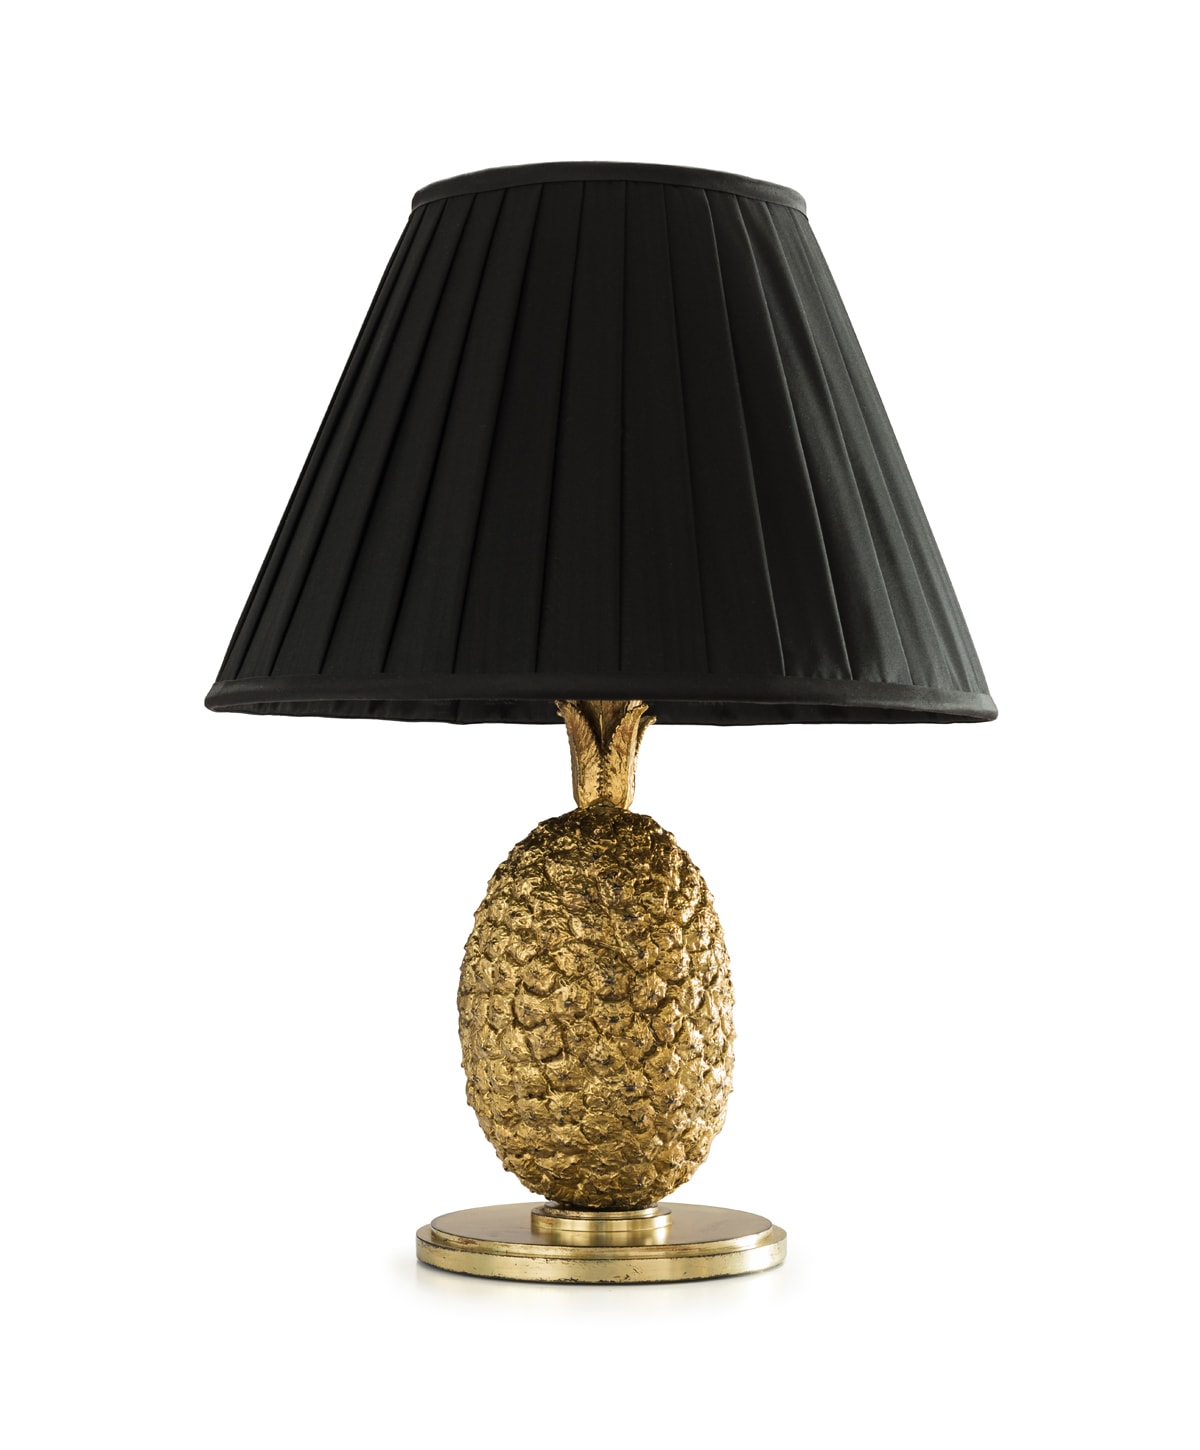 The Verandah Collection – The Pineapple Table Lamp